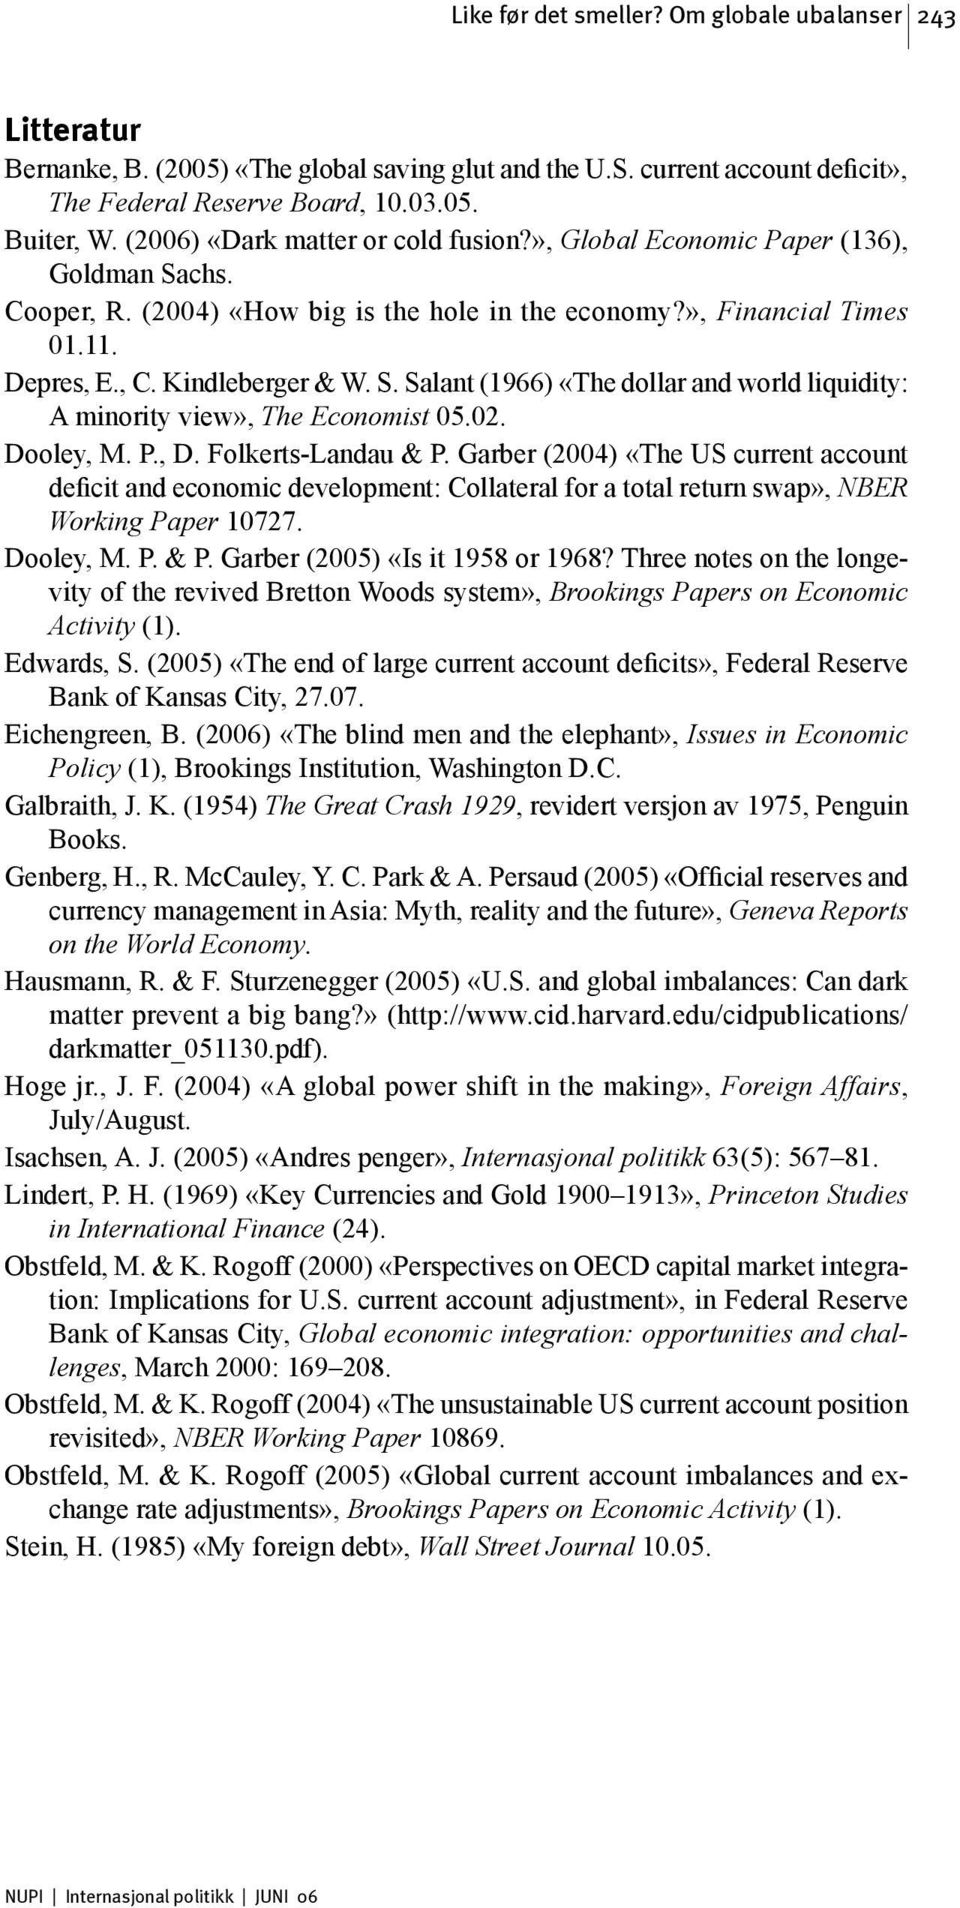 02. Dooley, M. P., D. Folkerts-Landau & P. Garber (2004) «The US current account deficit and economic development: Collateral for a total return swap», NBER Working Paper 10727. Dooley, M. P. & P. Garber (2005) «Is it 1958 or 1968?